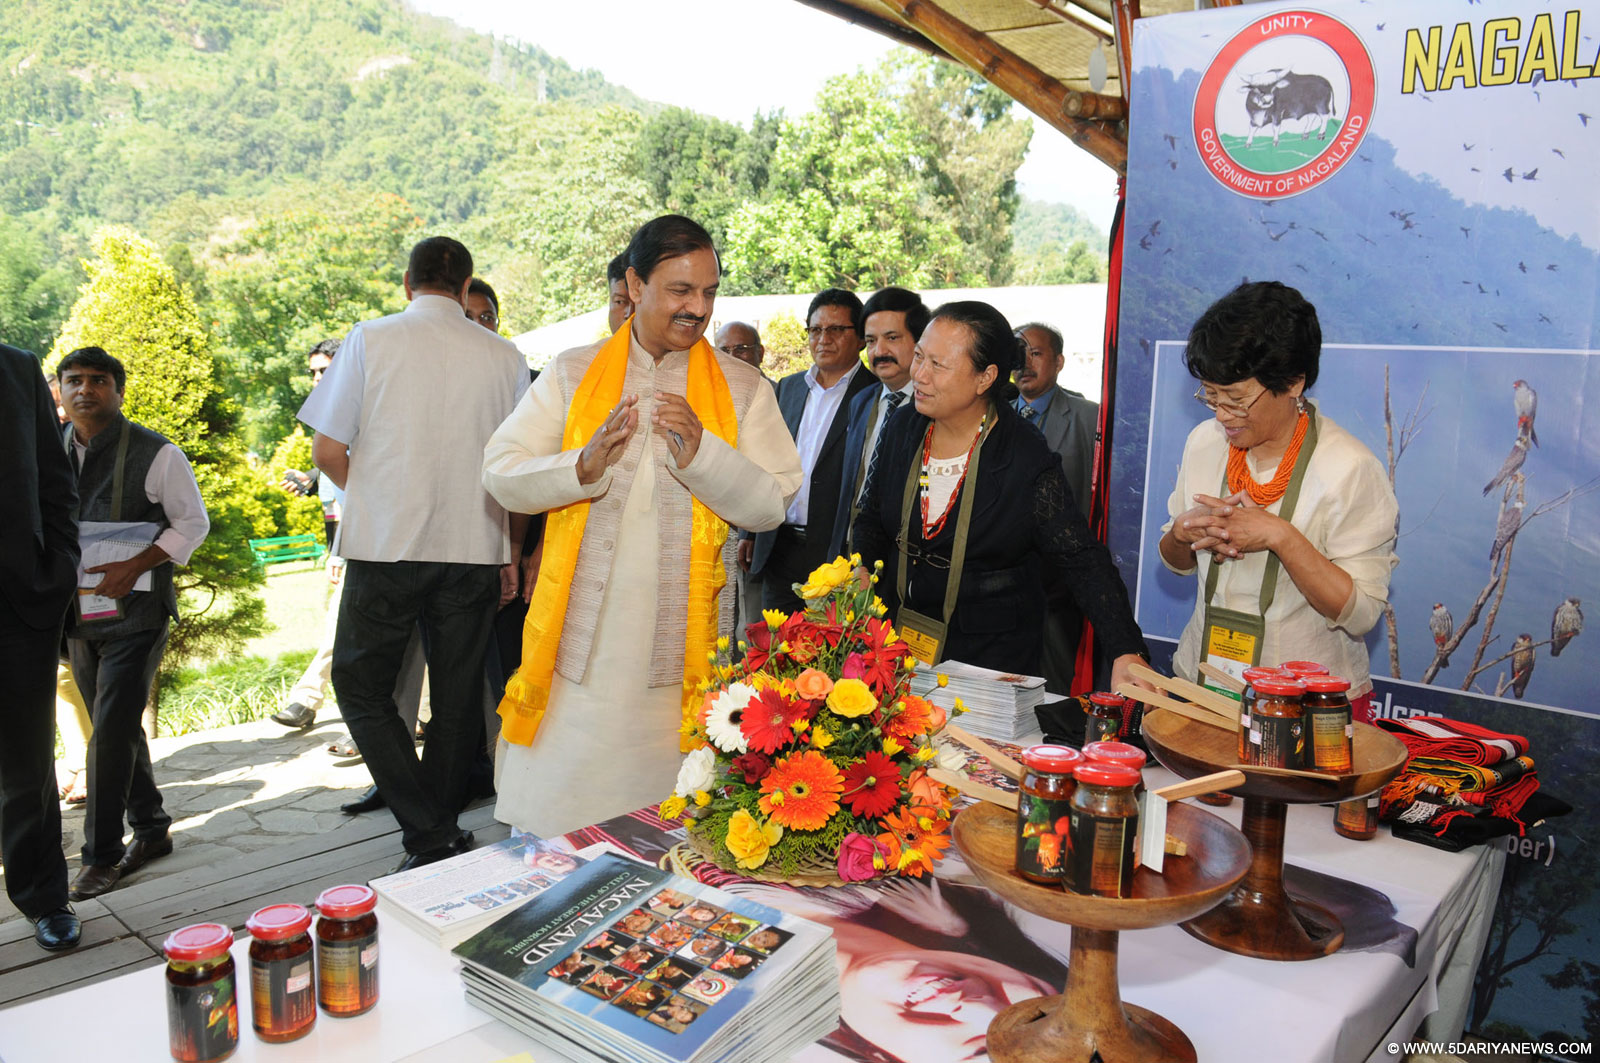 Dr. Mahesh Sharma visiting the exhibition, organised by the North East States & West Bengal, at the 4th International Tourism Mart for North East Region 2015, in Gangtok, Sikkim on October 15, 2015. 